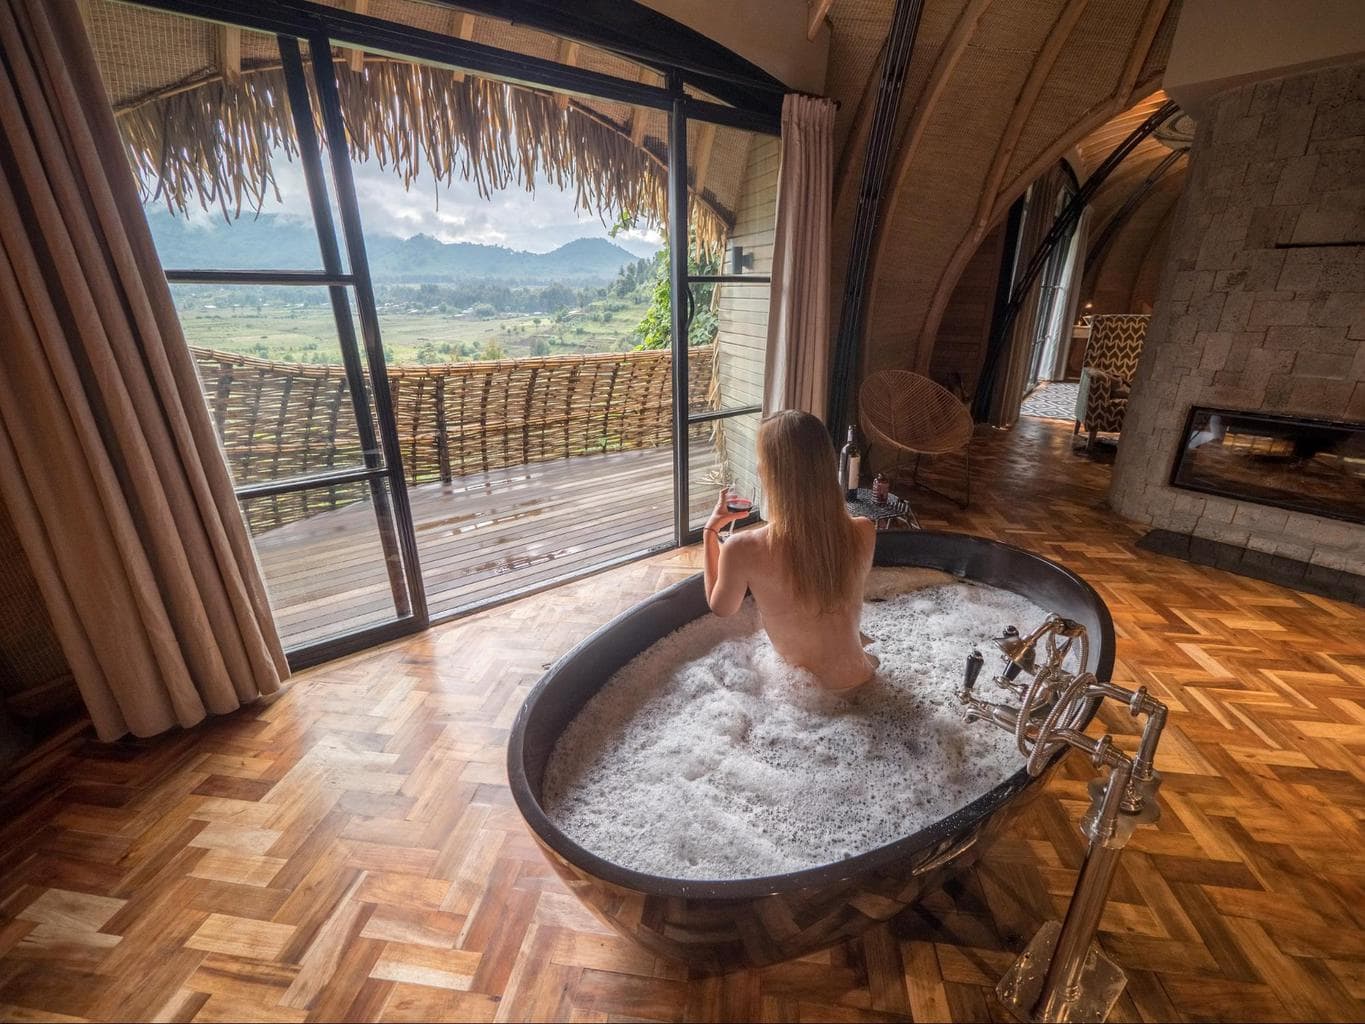 Soaking in the hot bathtub with a glass of wine while it’s cold outside at Bisate Lodge